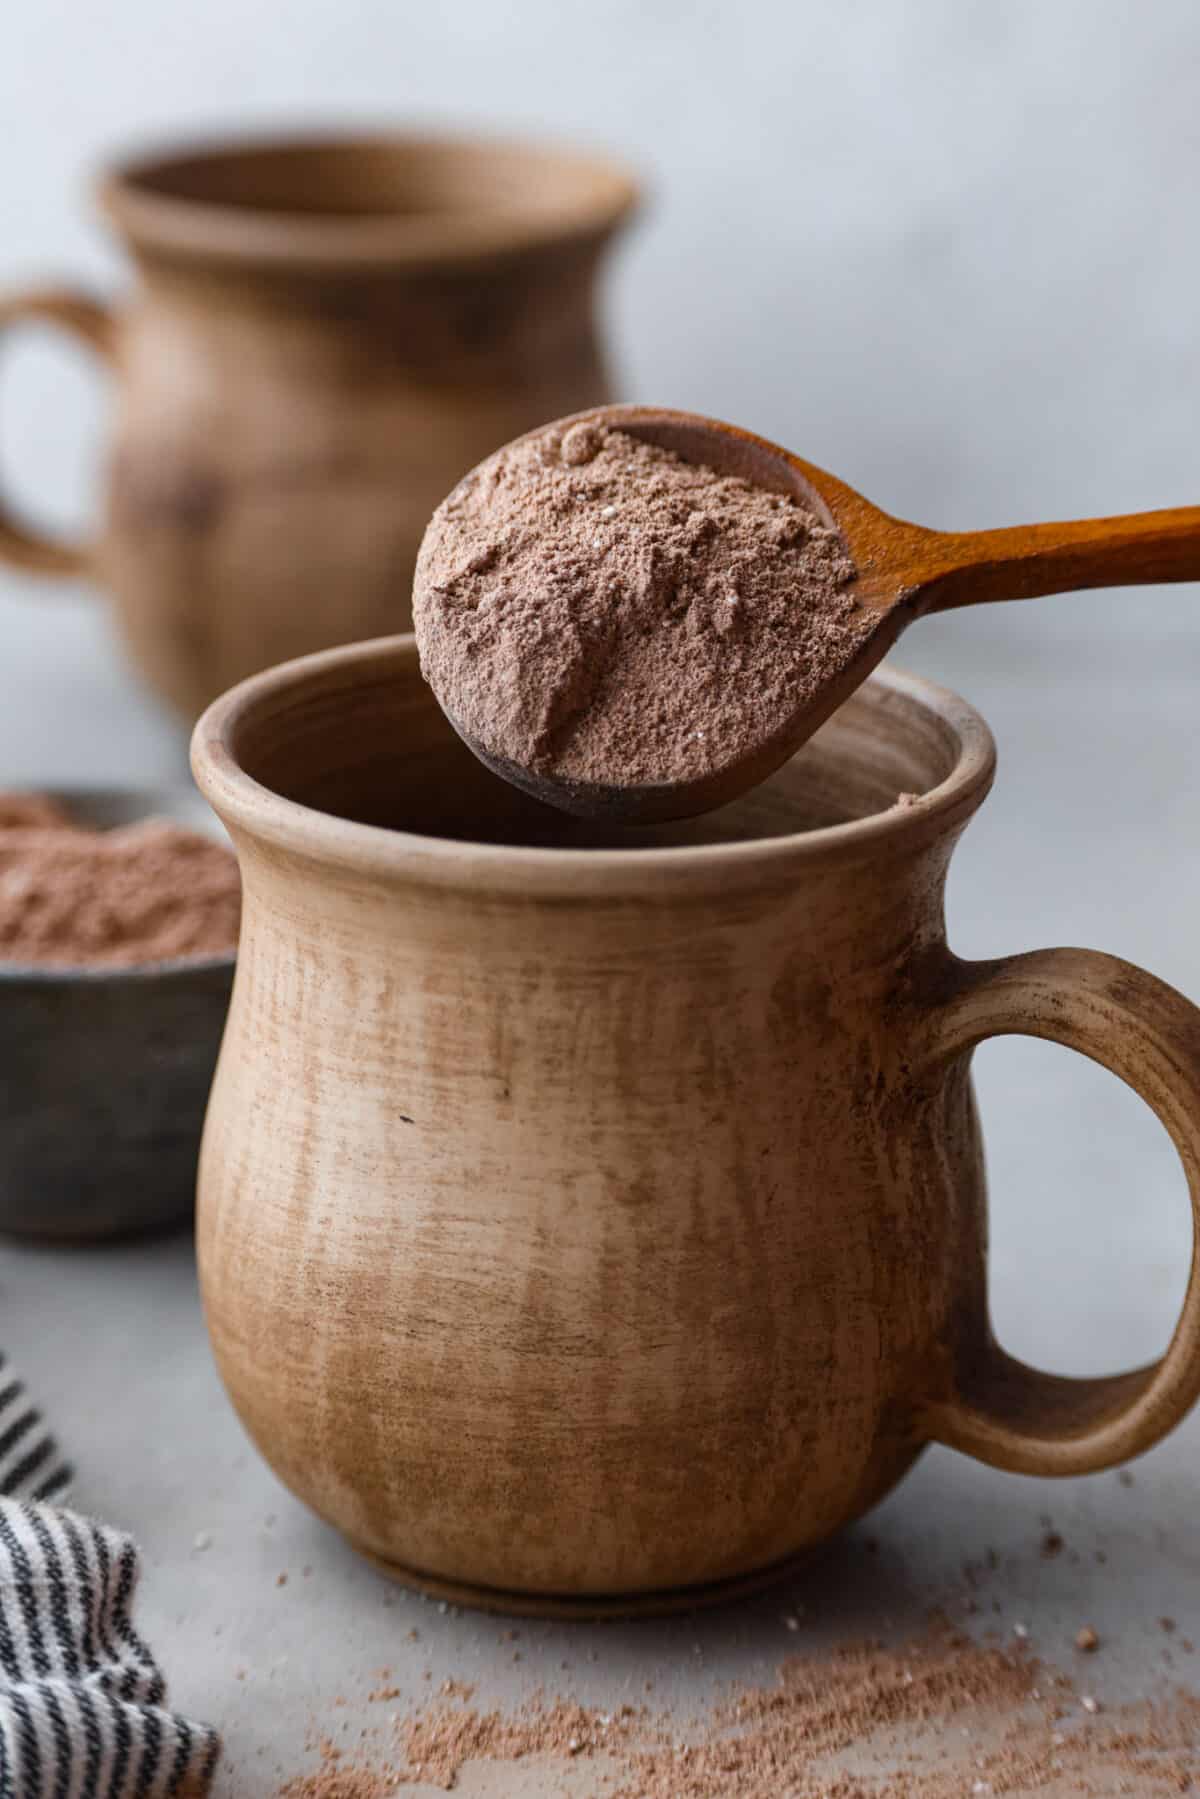 Pouring a spoonful of hot chocolate mix into a mug.